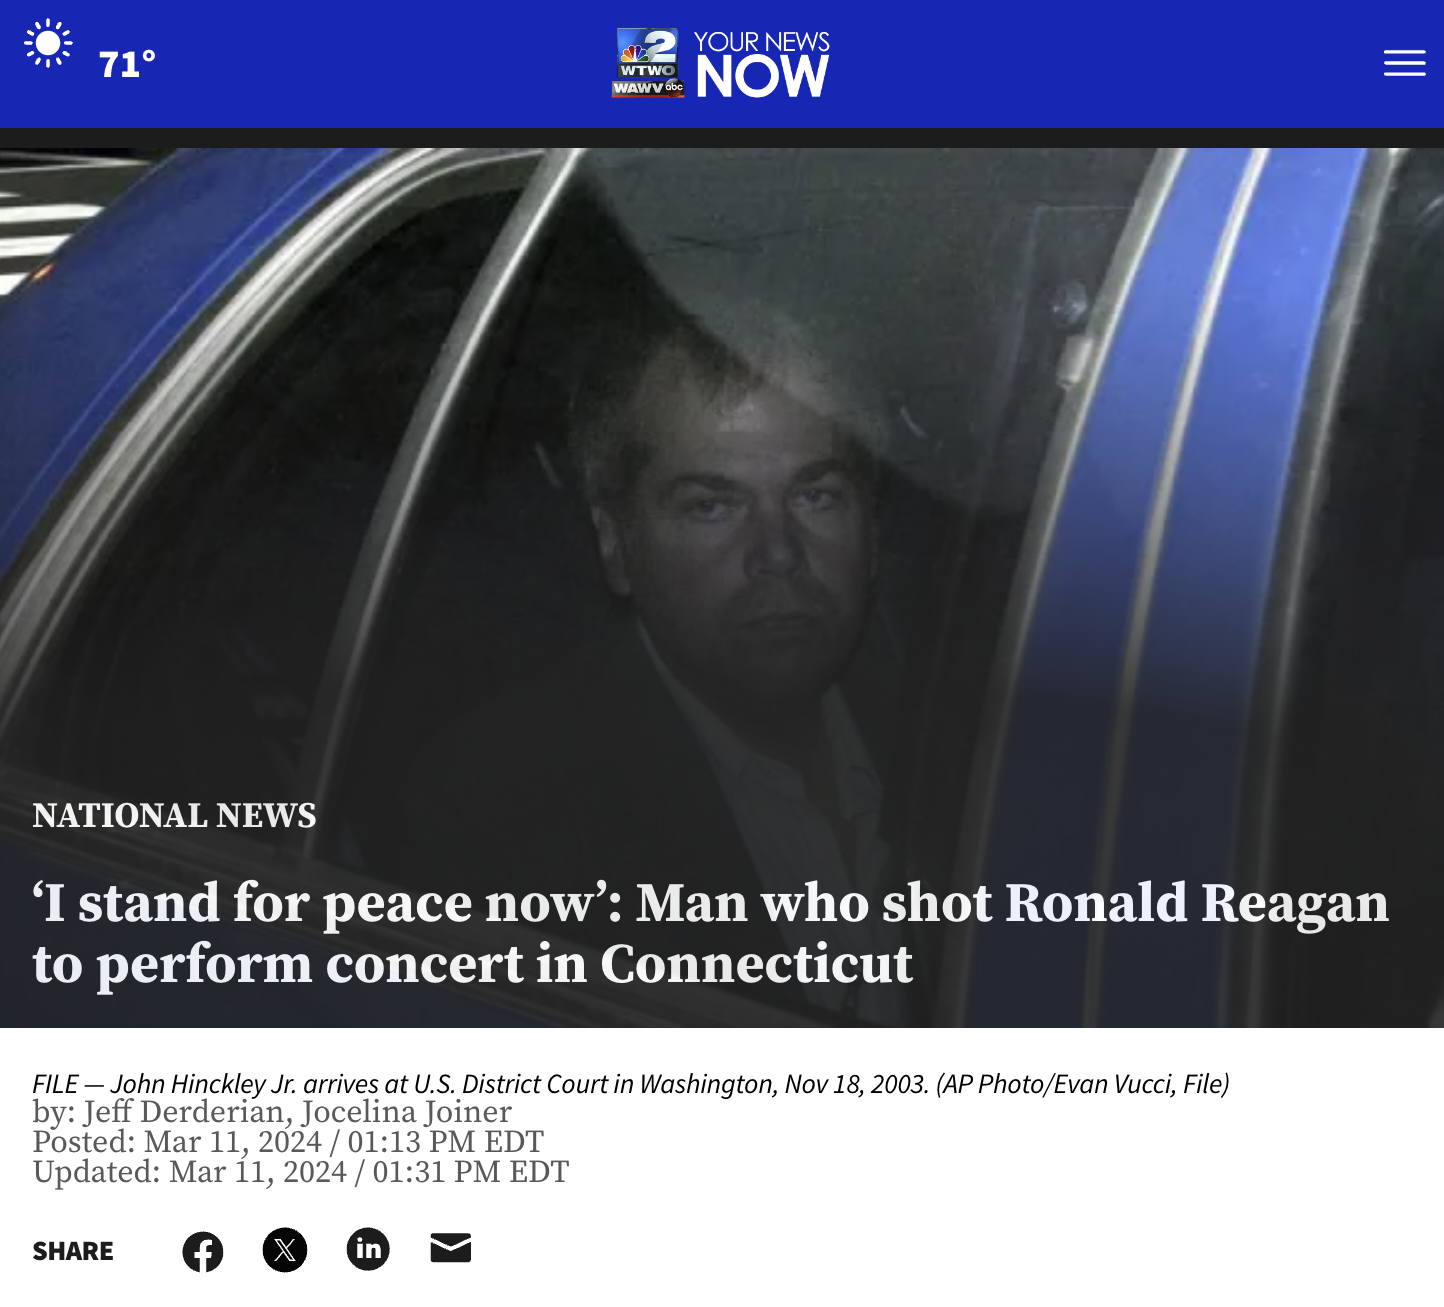 photo caption - 71 Wtwo Your News Now Iii National News 'I stand for peace now' Man who shot Ronald Reagan to perform concert in Connecticut FileJohn Hinckley Jr. arrives at U.S. District Court in Washington, . Ap PhotoEvan Vucci, File by Jeff Derderian, 